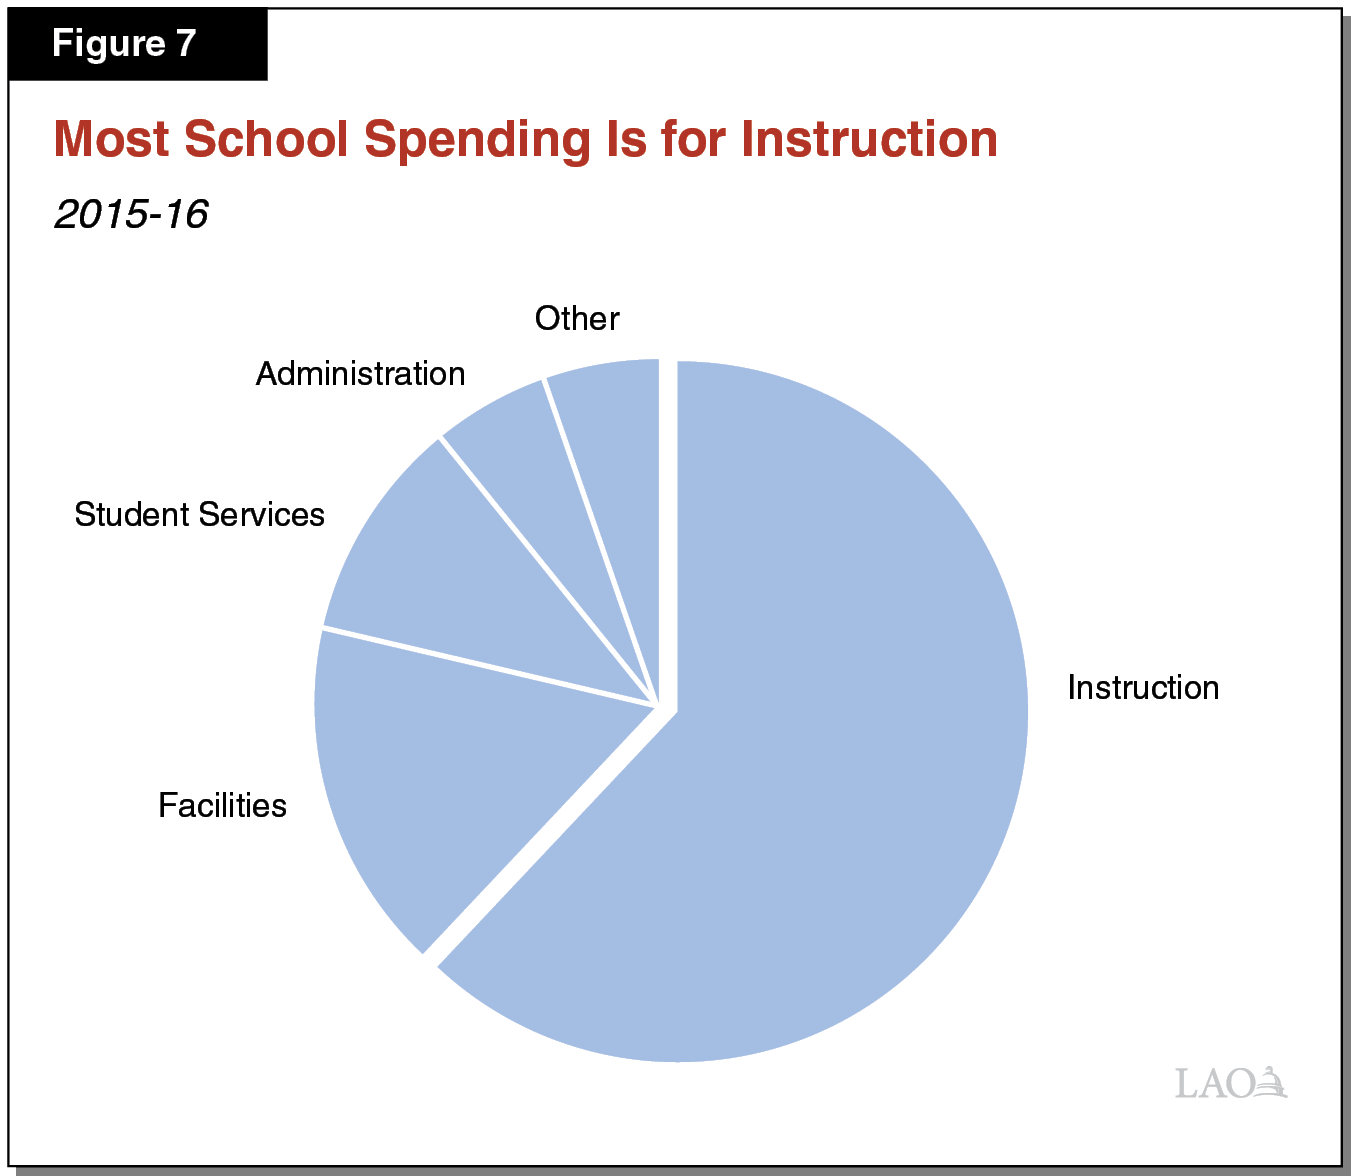 Figure 7 - Most School Spending Is for Instruction